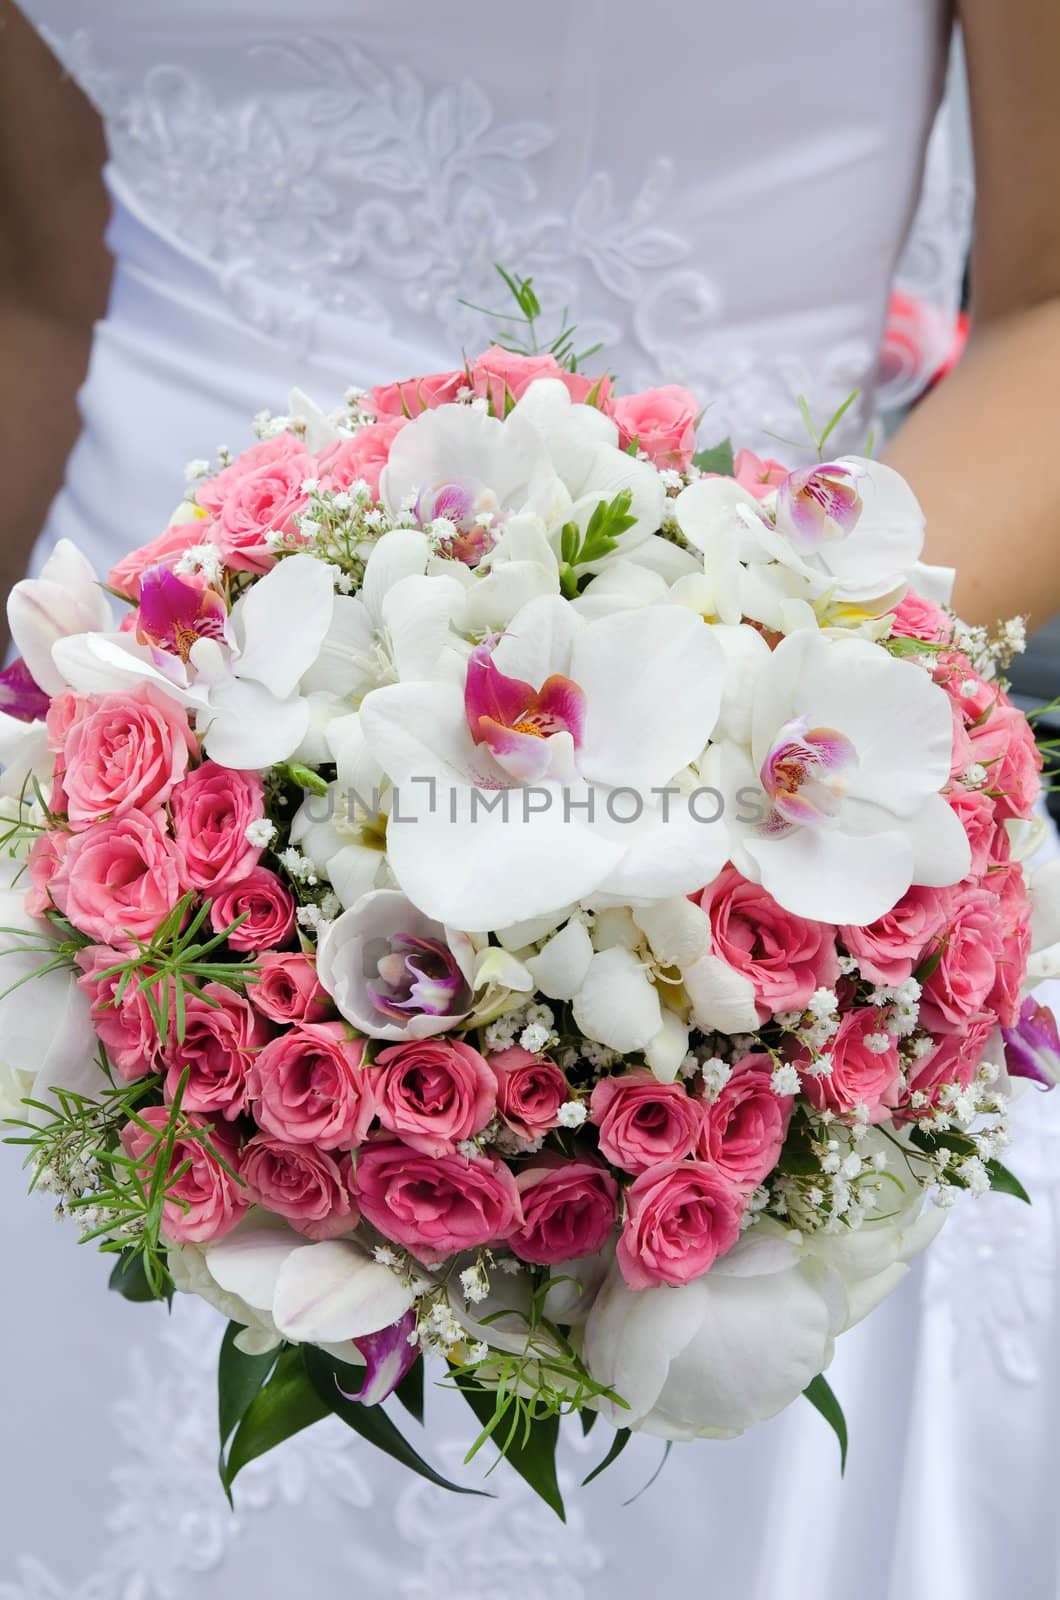 Bride with wedding bouquet by mycola